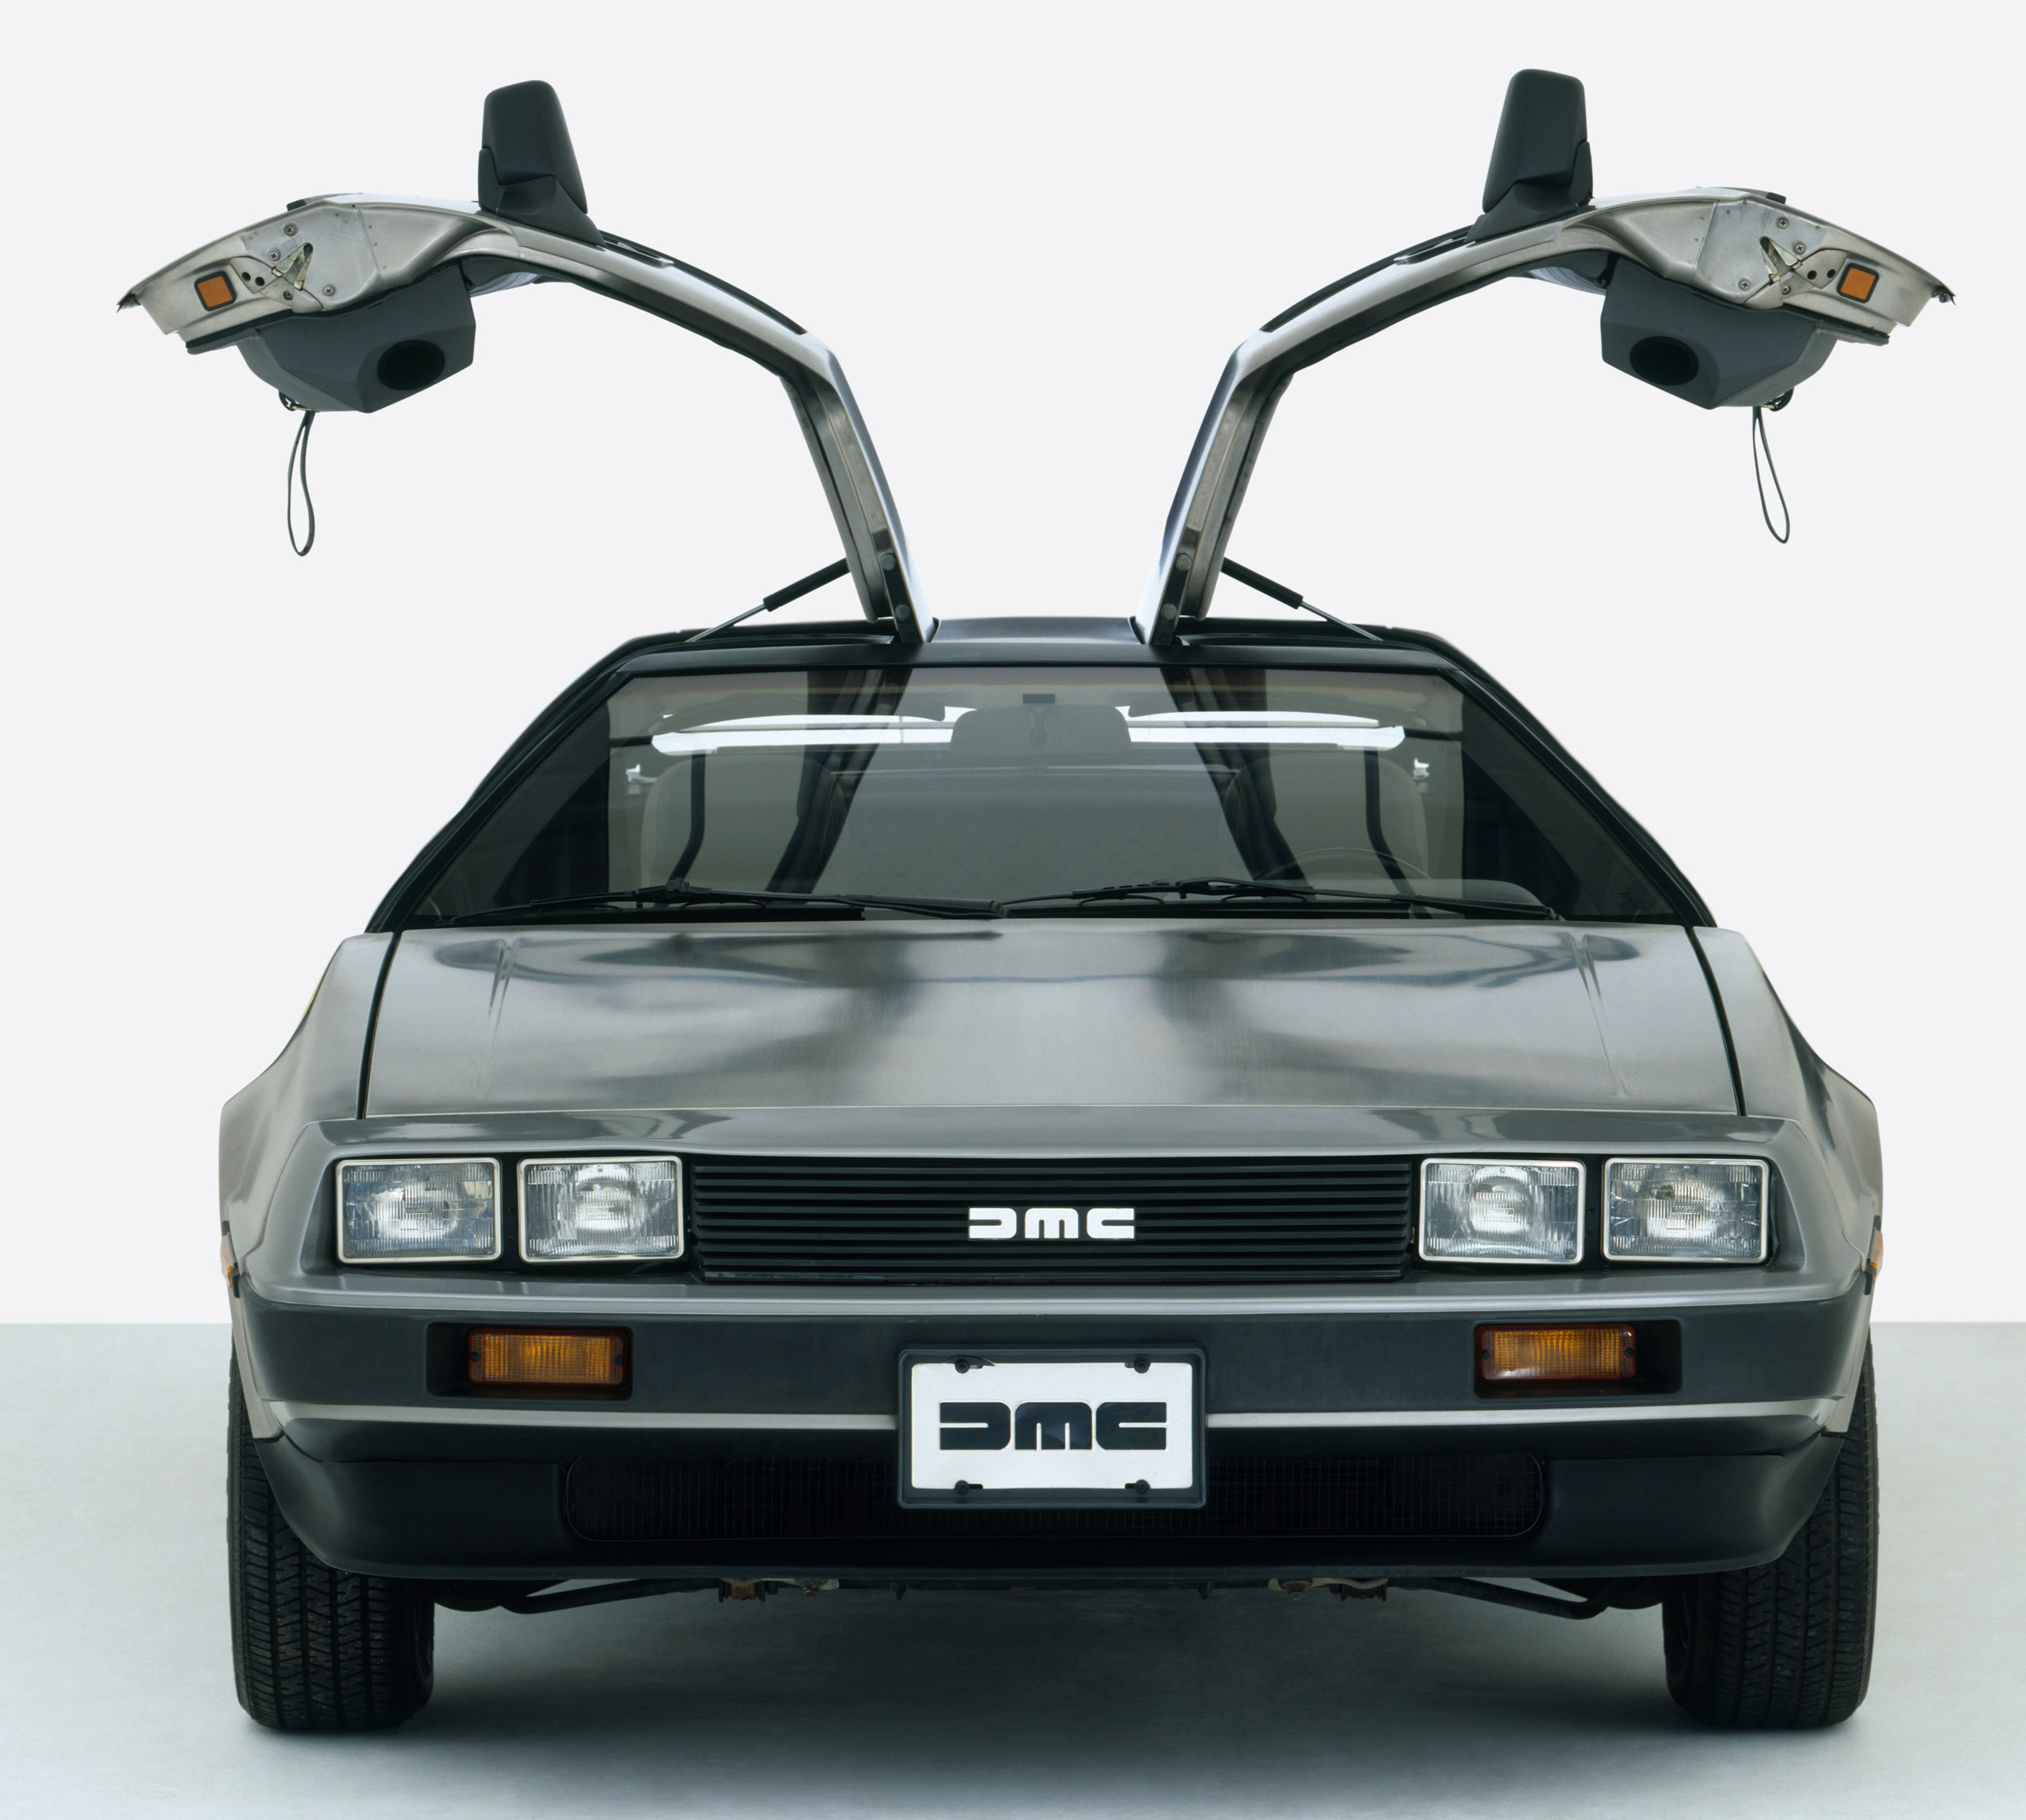 DeLorean DMC 12 with gullwing doors, 1979-82, front view. (Matthew Ward—Dorling Kindersley/Getty Images)